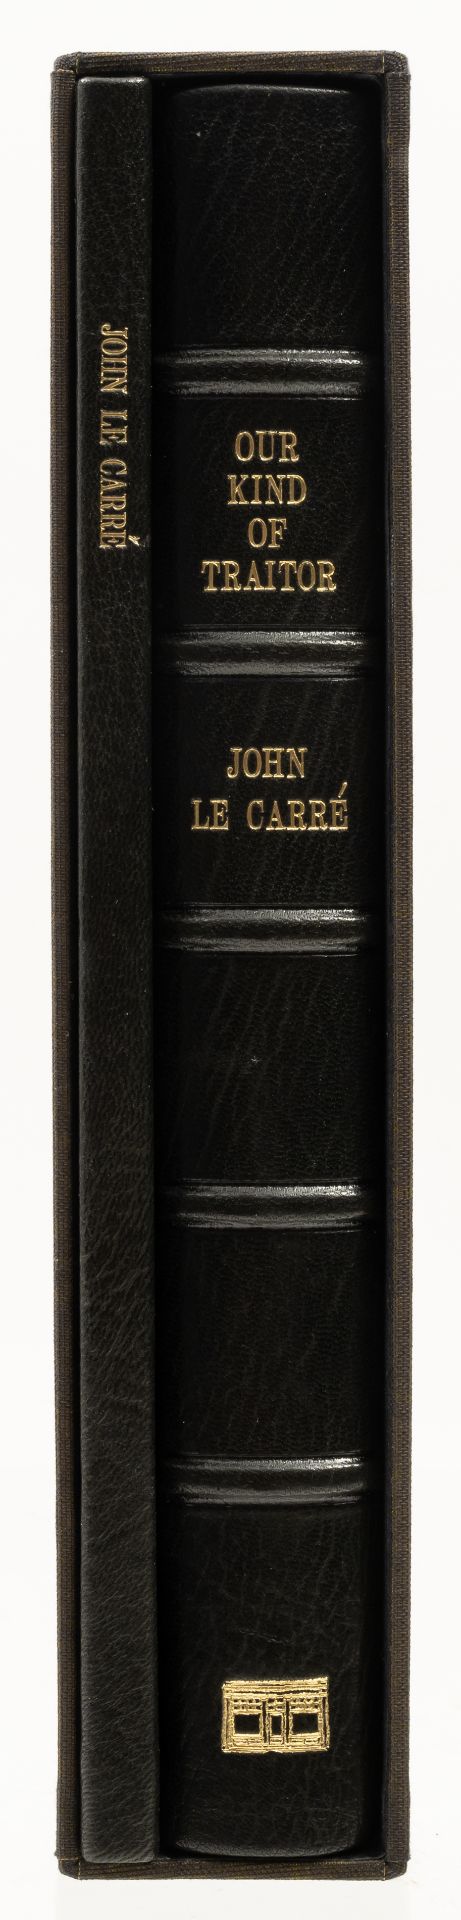 le Carré (John) Our Kind of Traitor, one of 25 copies signed by the author, with additional volum...